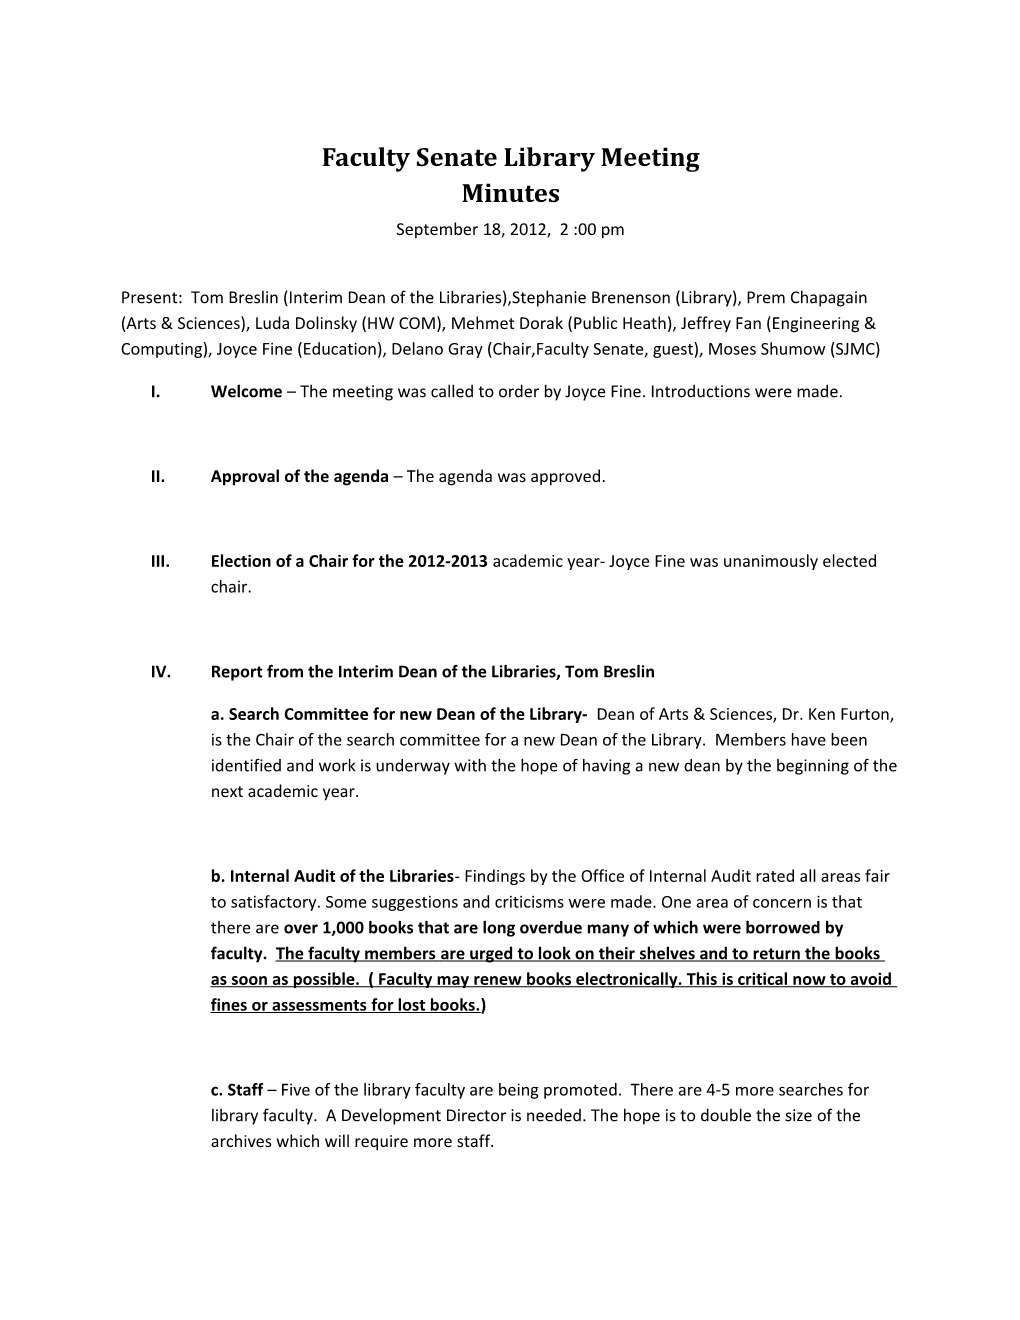 Faculty Senate Library Meeting Minutes